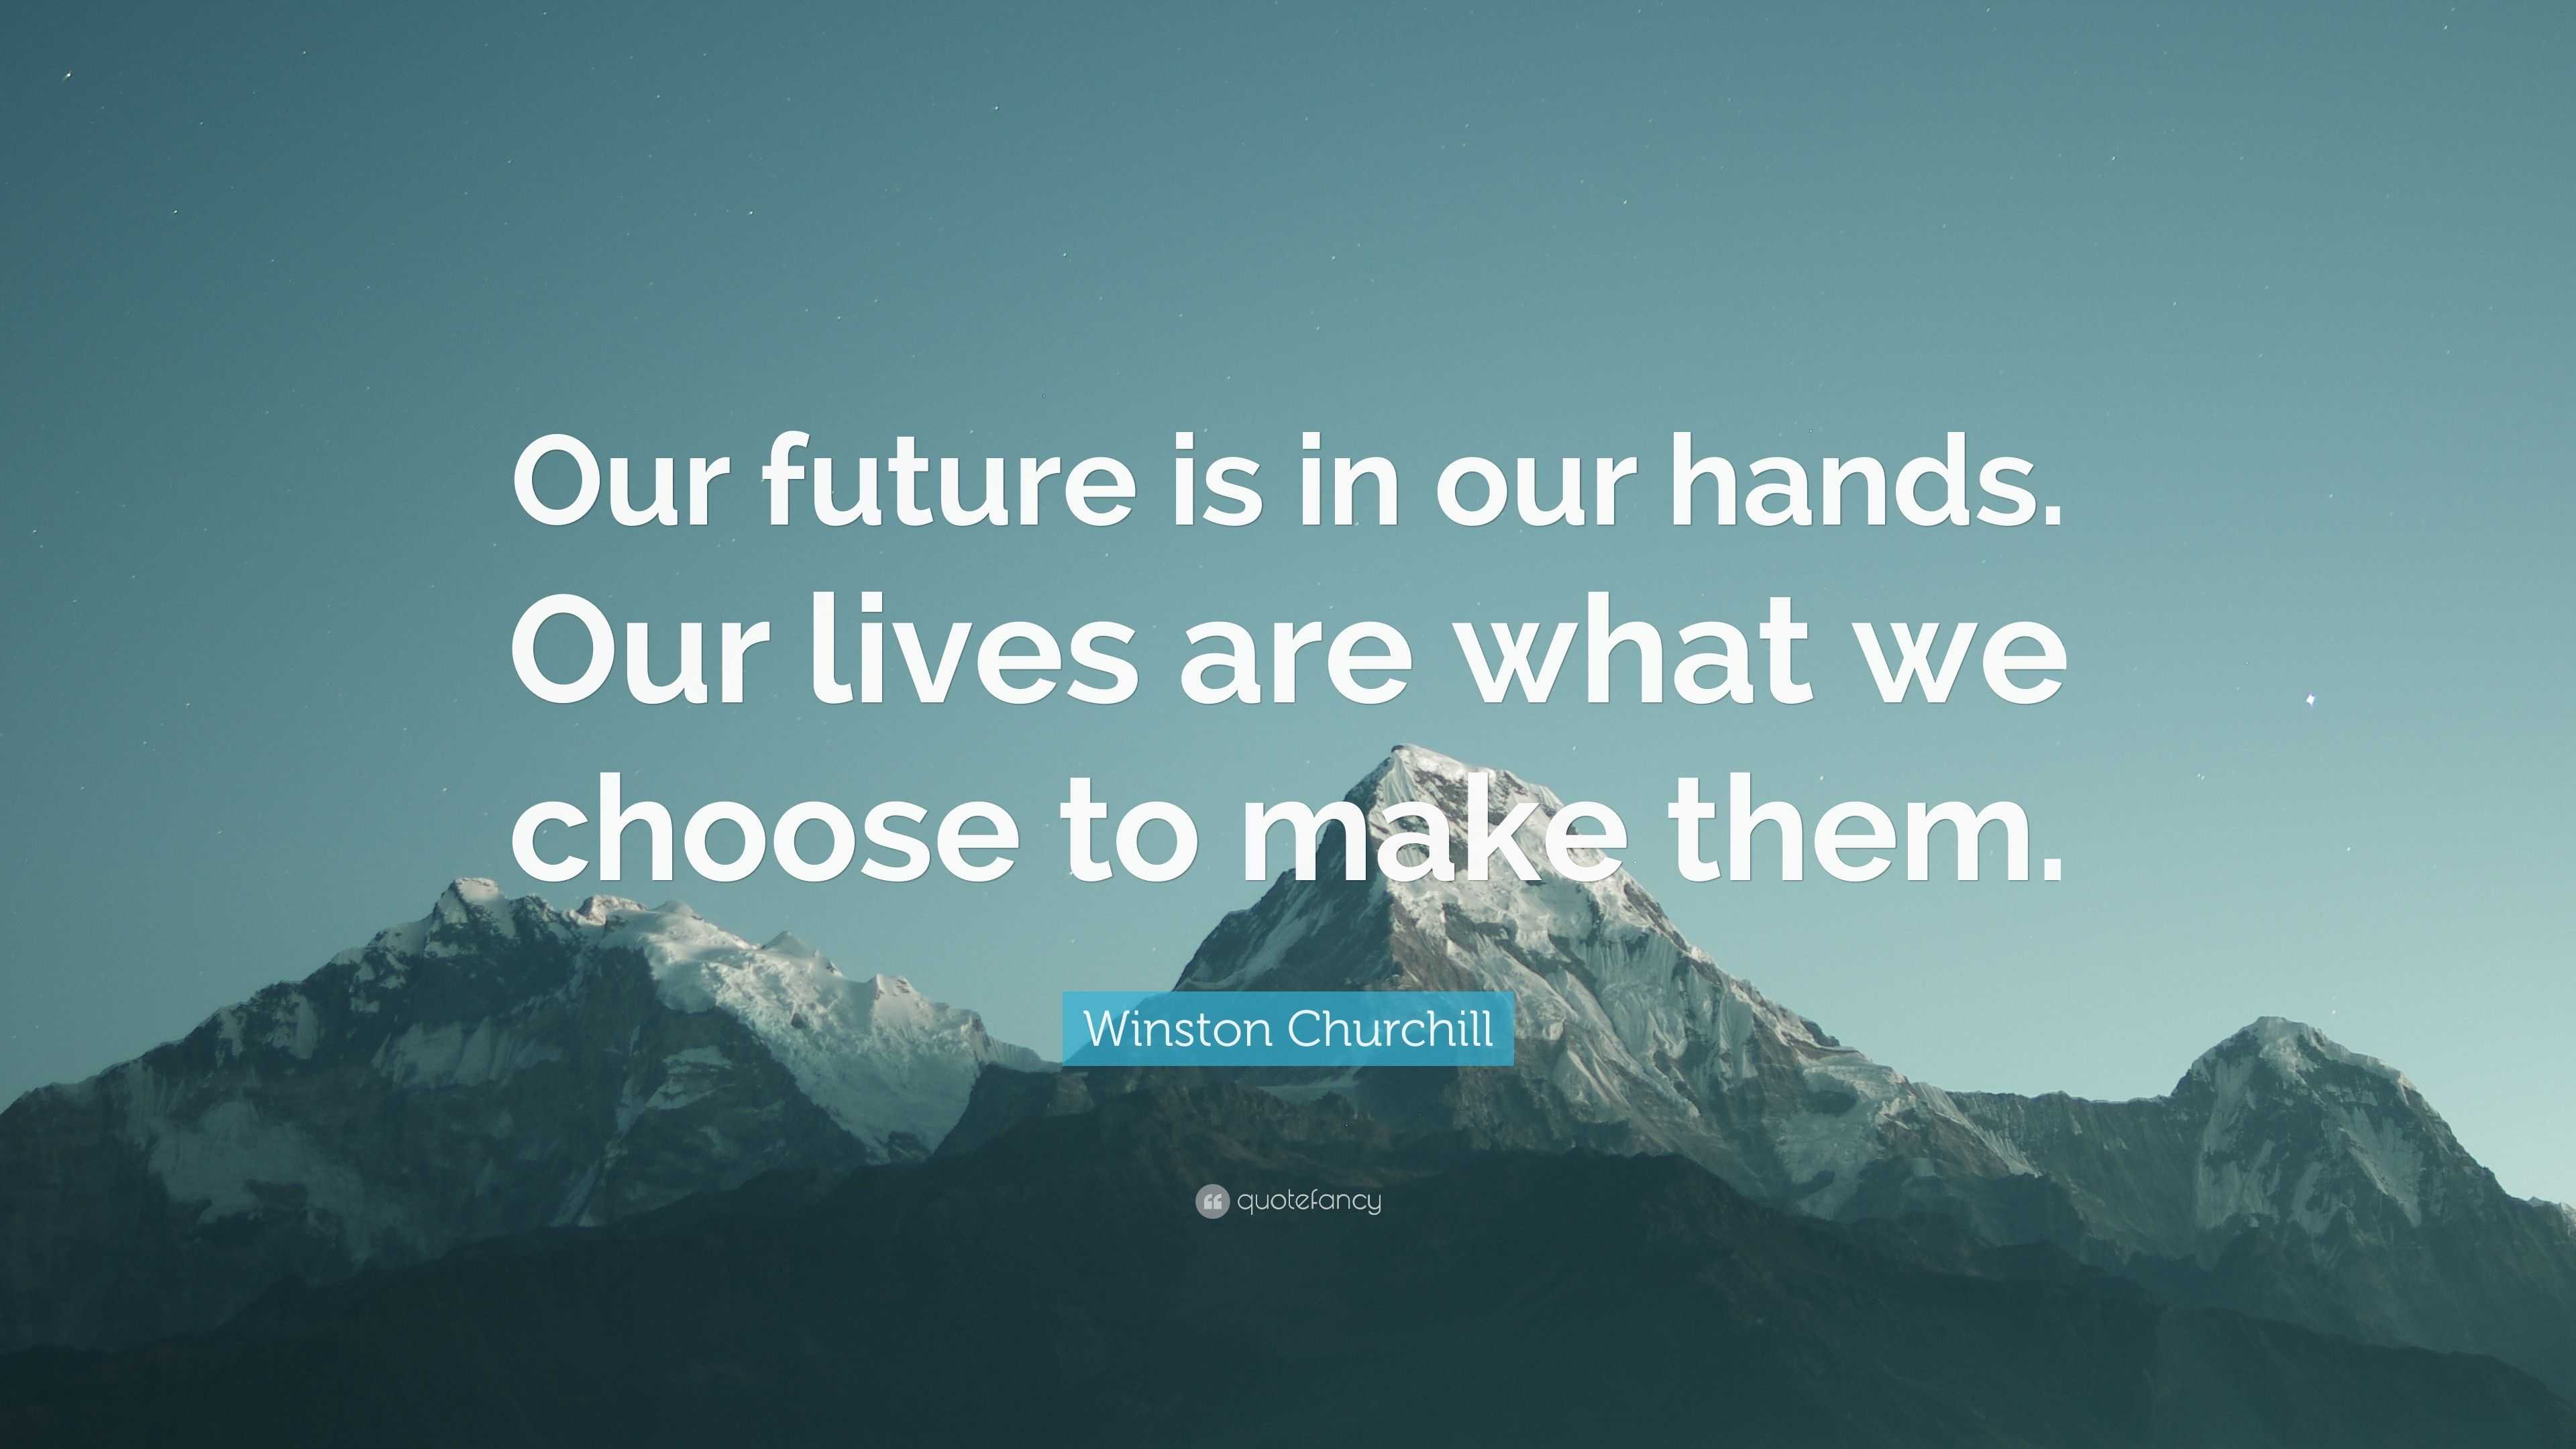 the future is in our hands essay